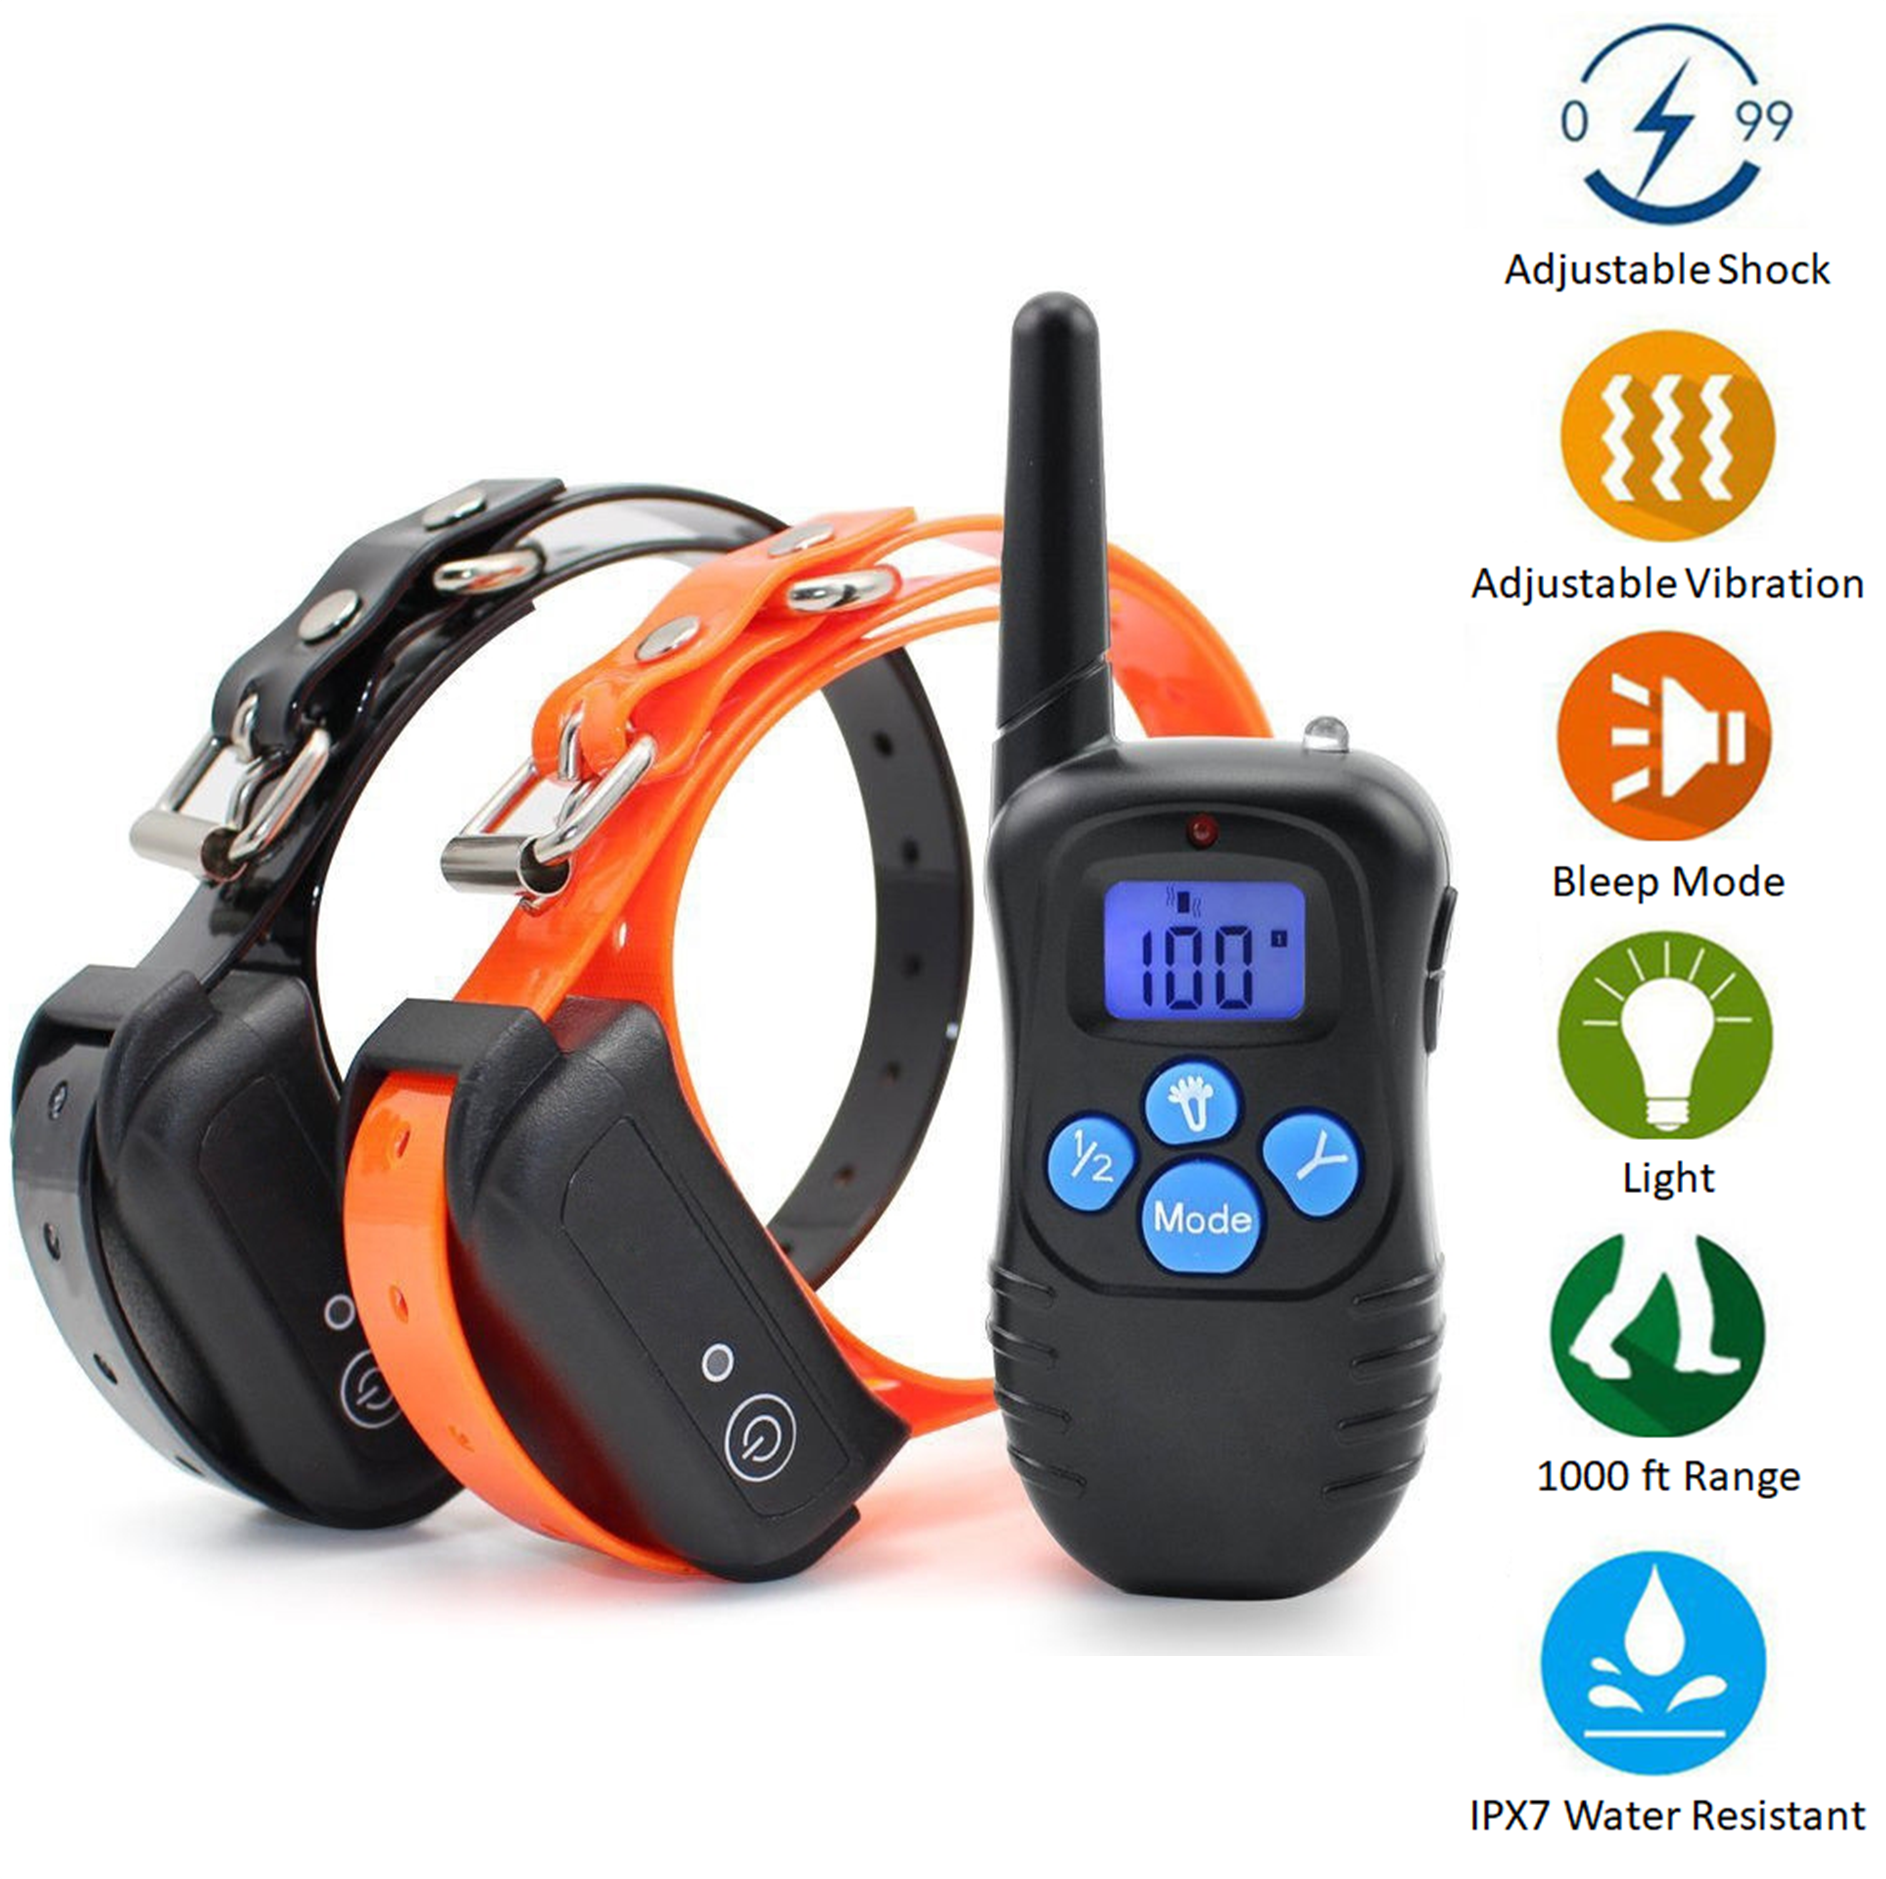 Best dog training collar, charge both devices simultaneously, dog training device stop barking dogs. Pet trainer